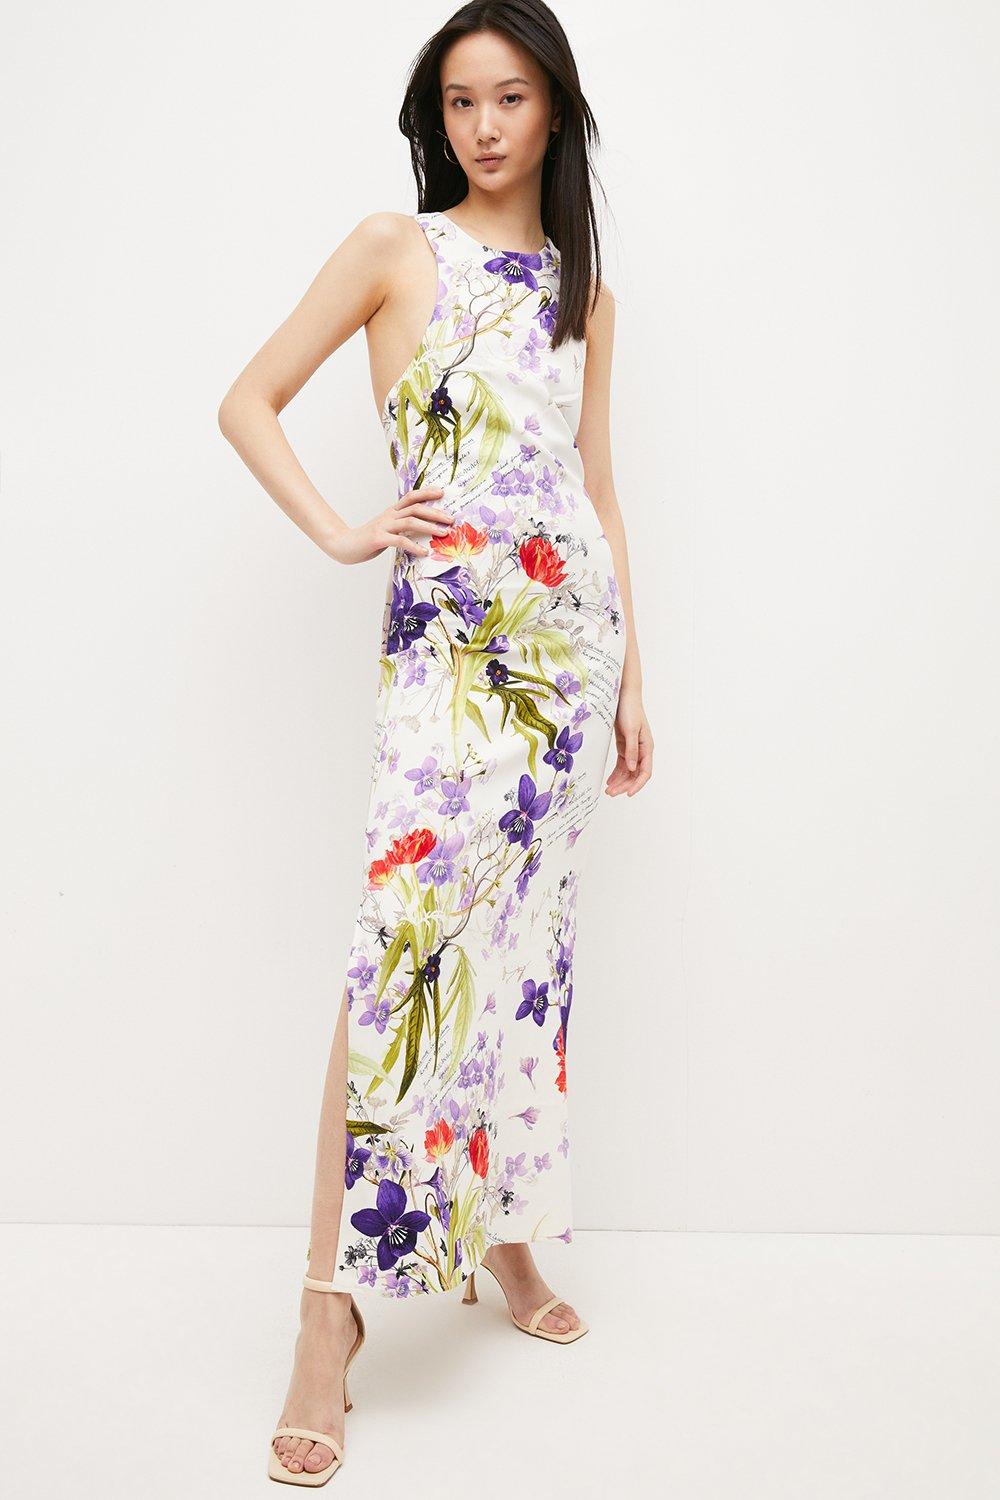 Scattering Viola and Tulipa Floral Compact Viscose Cross Back Maxi